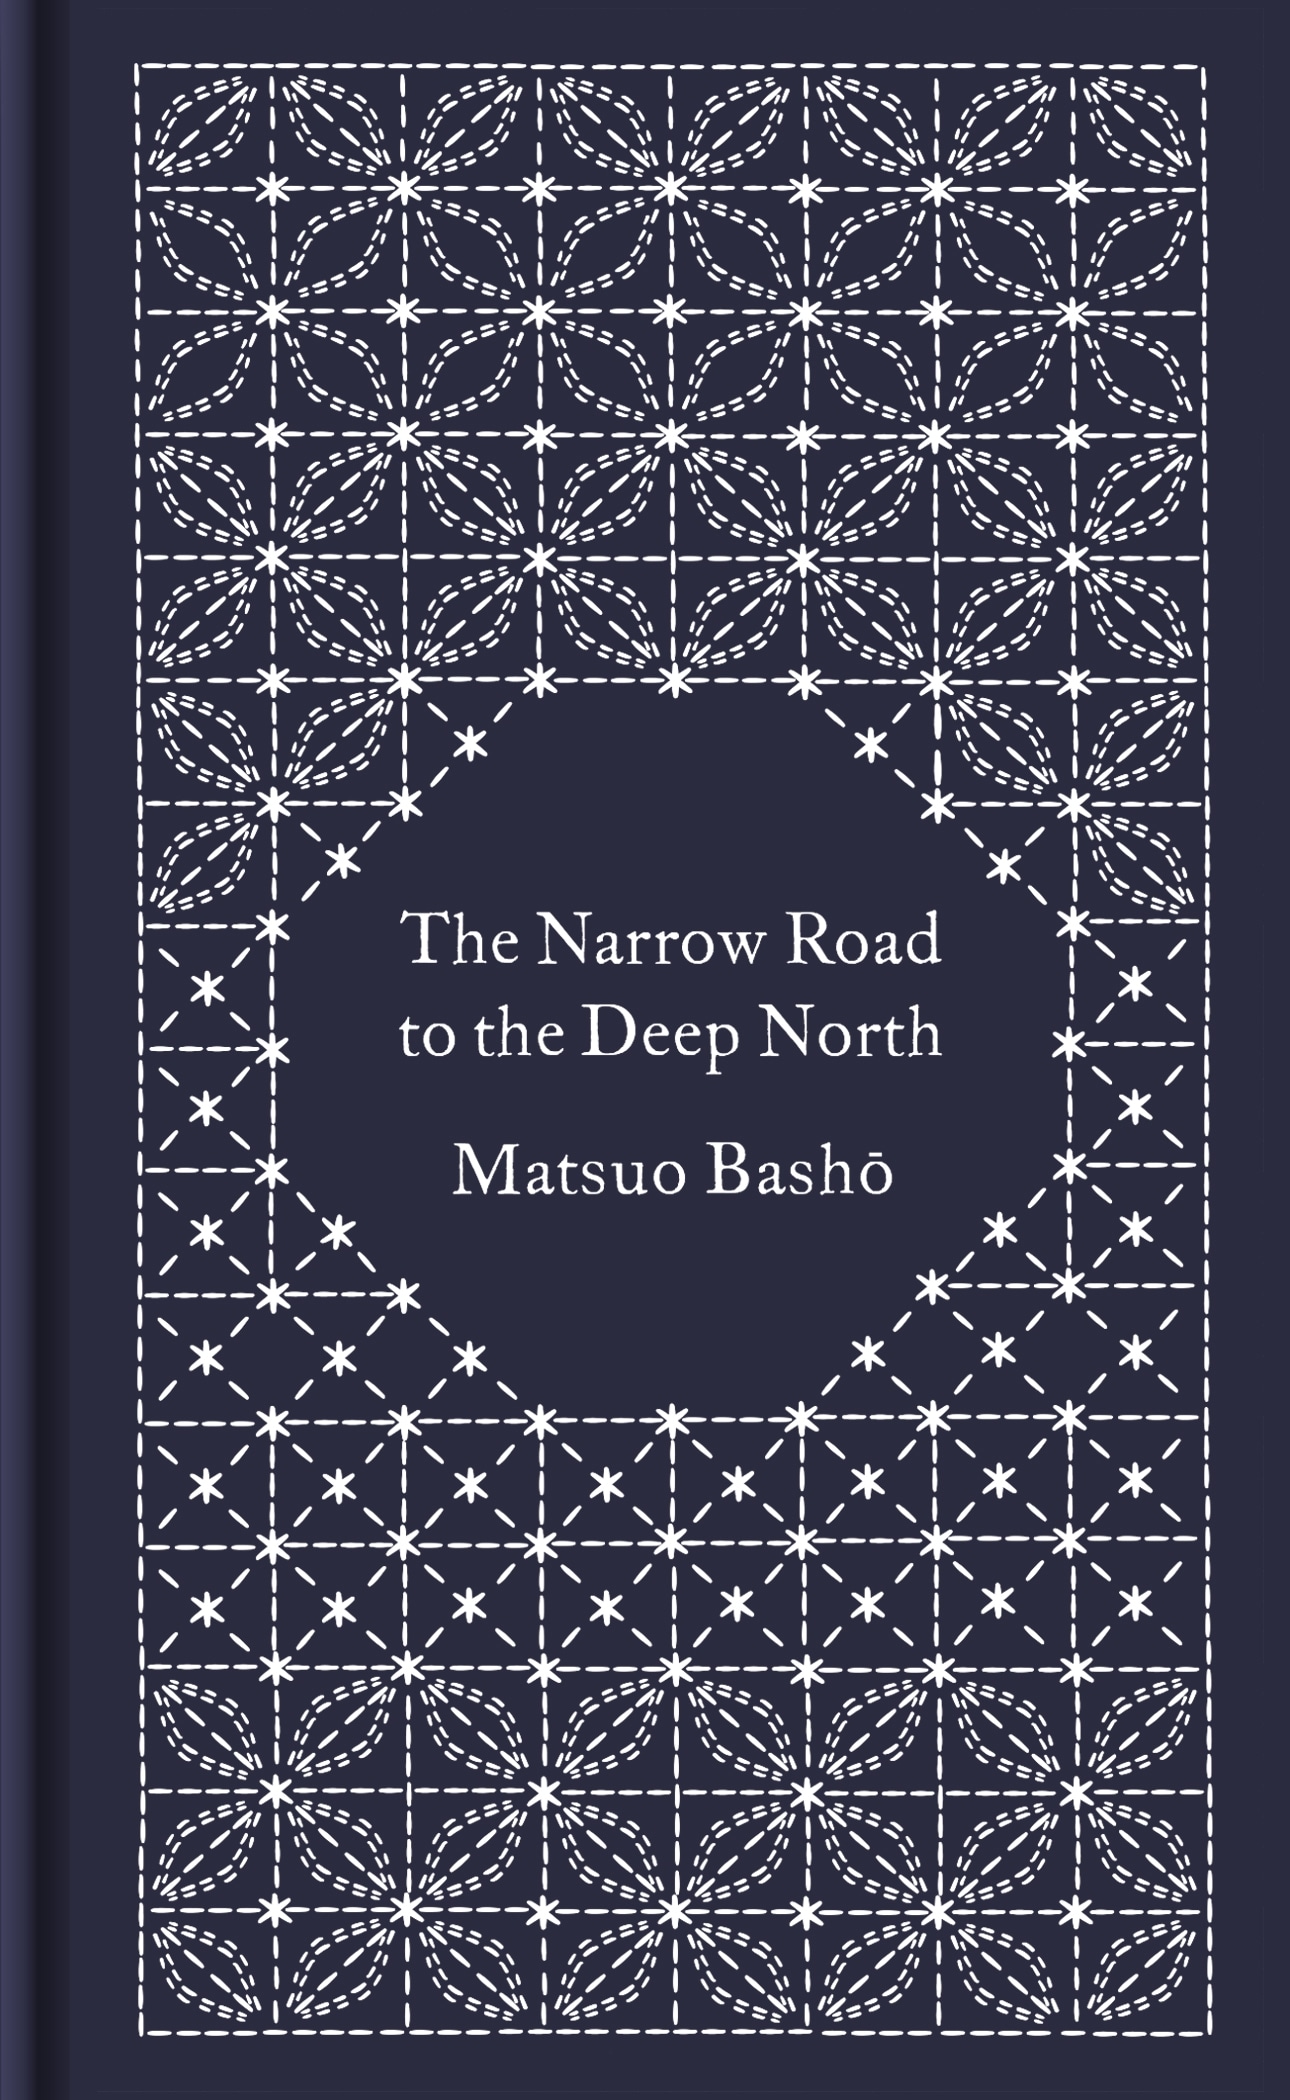 Book “The Narrow Road to the Deep North and Other Travel Sketches” by Matsuo Basho — February 27, 2020